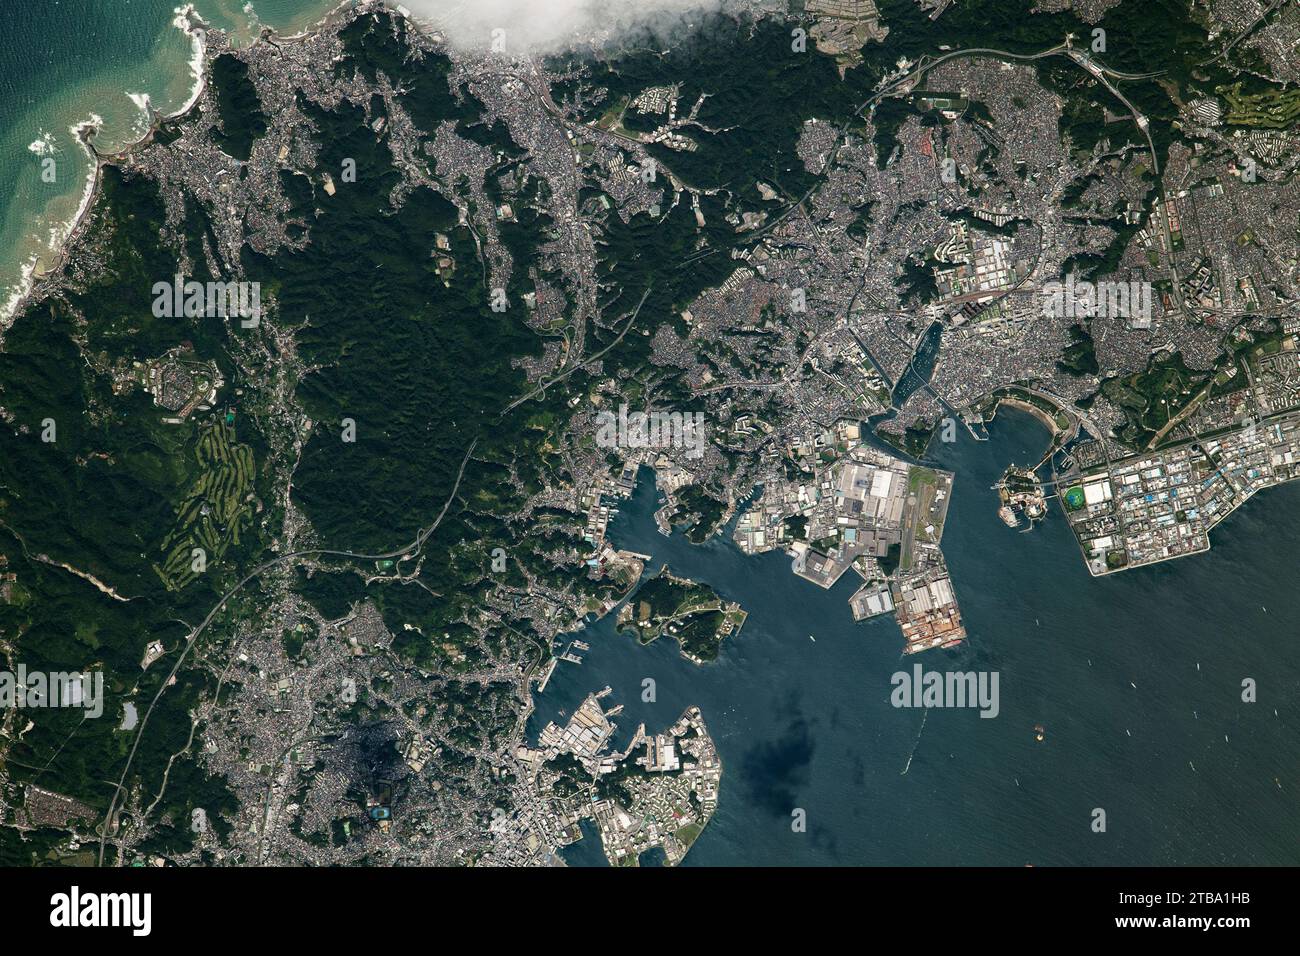 View from space of the northern section of Japan's Miura Peninsula. Stock Photo